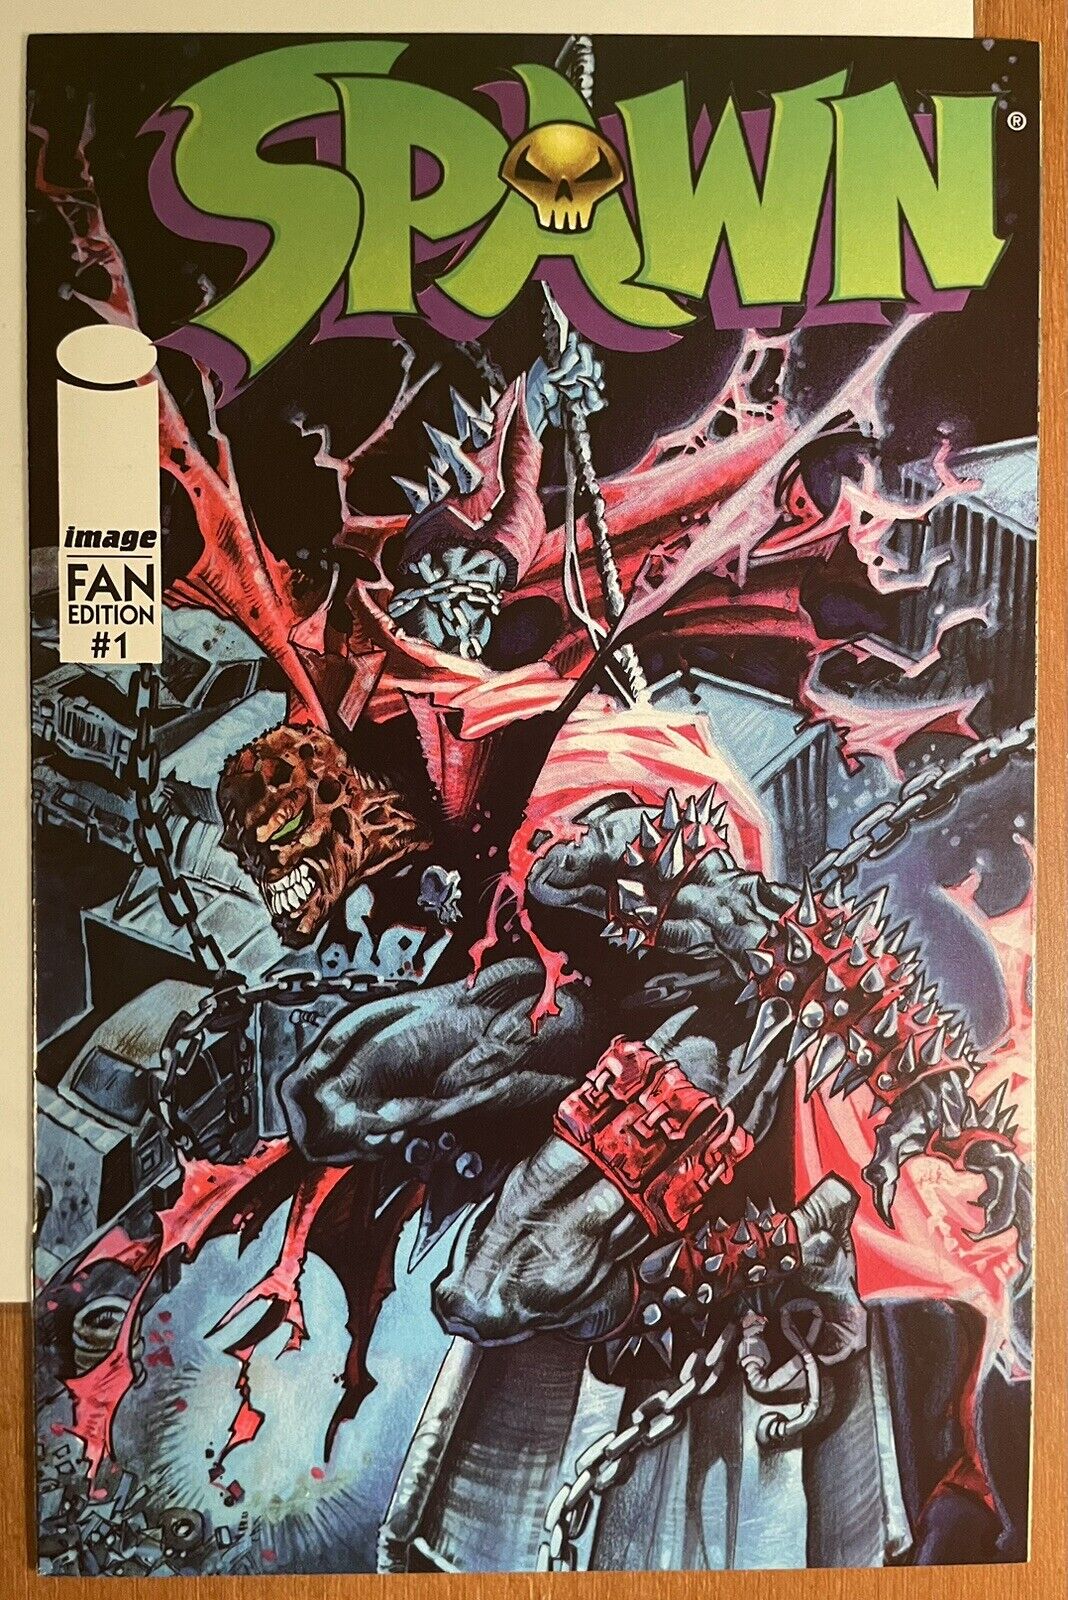 Spawn Fan Edition #1 (Image, 1996)- VF- Cover B (Overstreet’s FAN Exclusive)